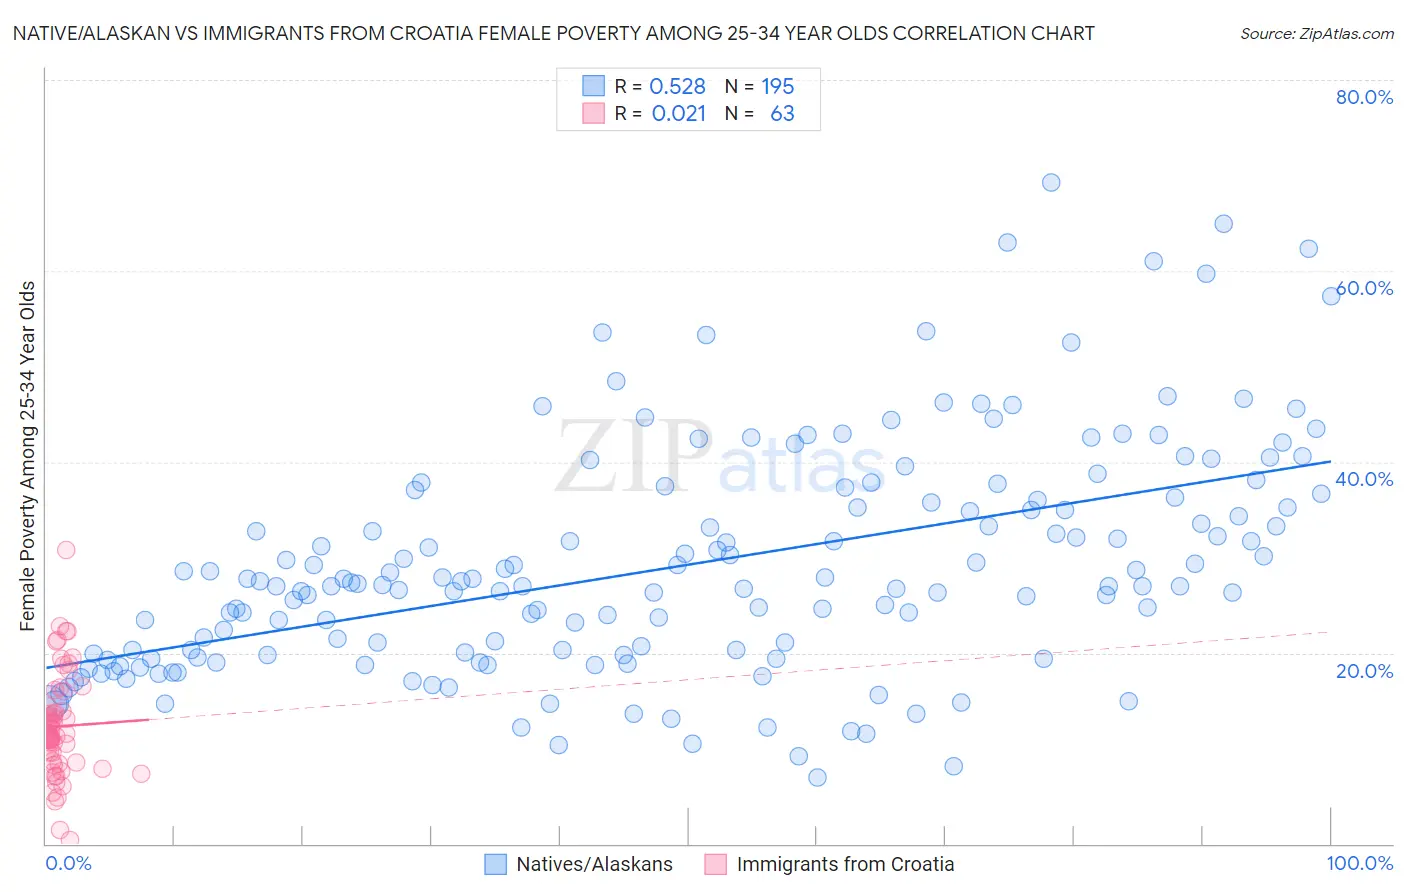 Native/Alaskan vs Immigrants from Croatia Female Poverty Among 25-34 Year Olds